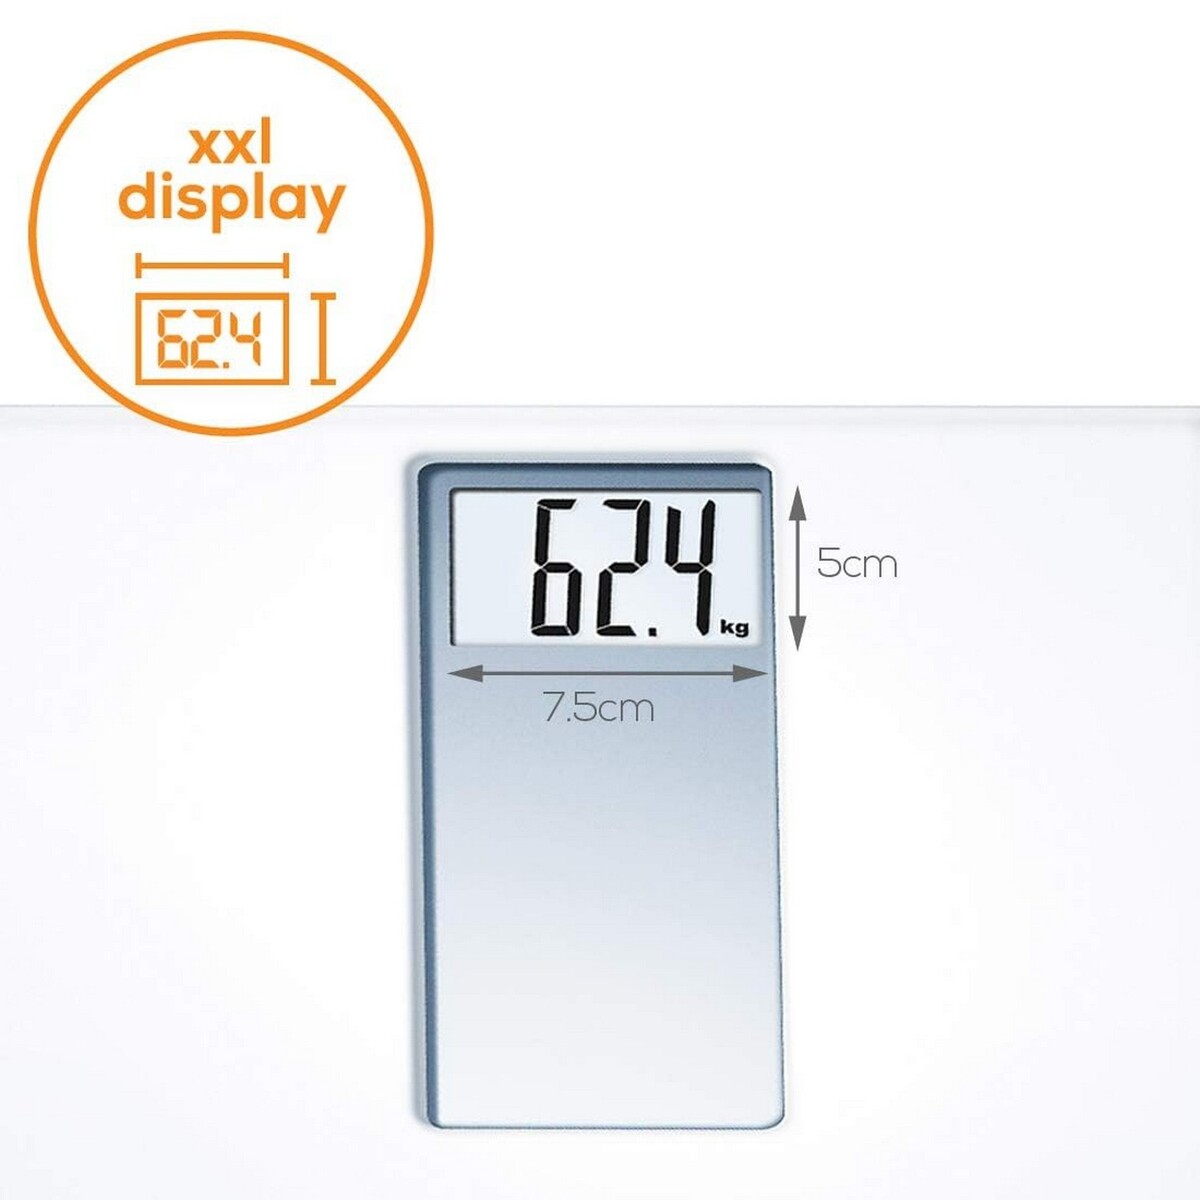 Beurer Body Digital Weighing Scale PS 160